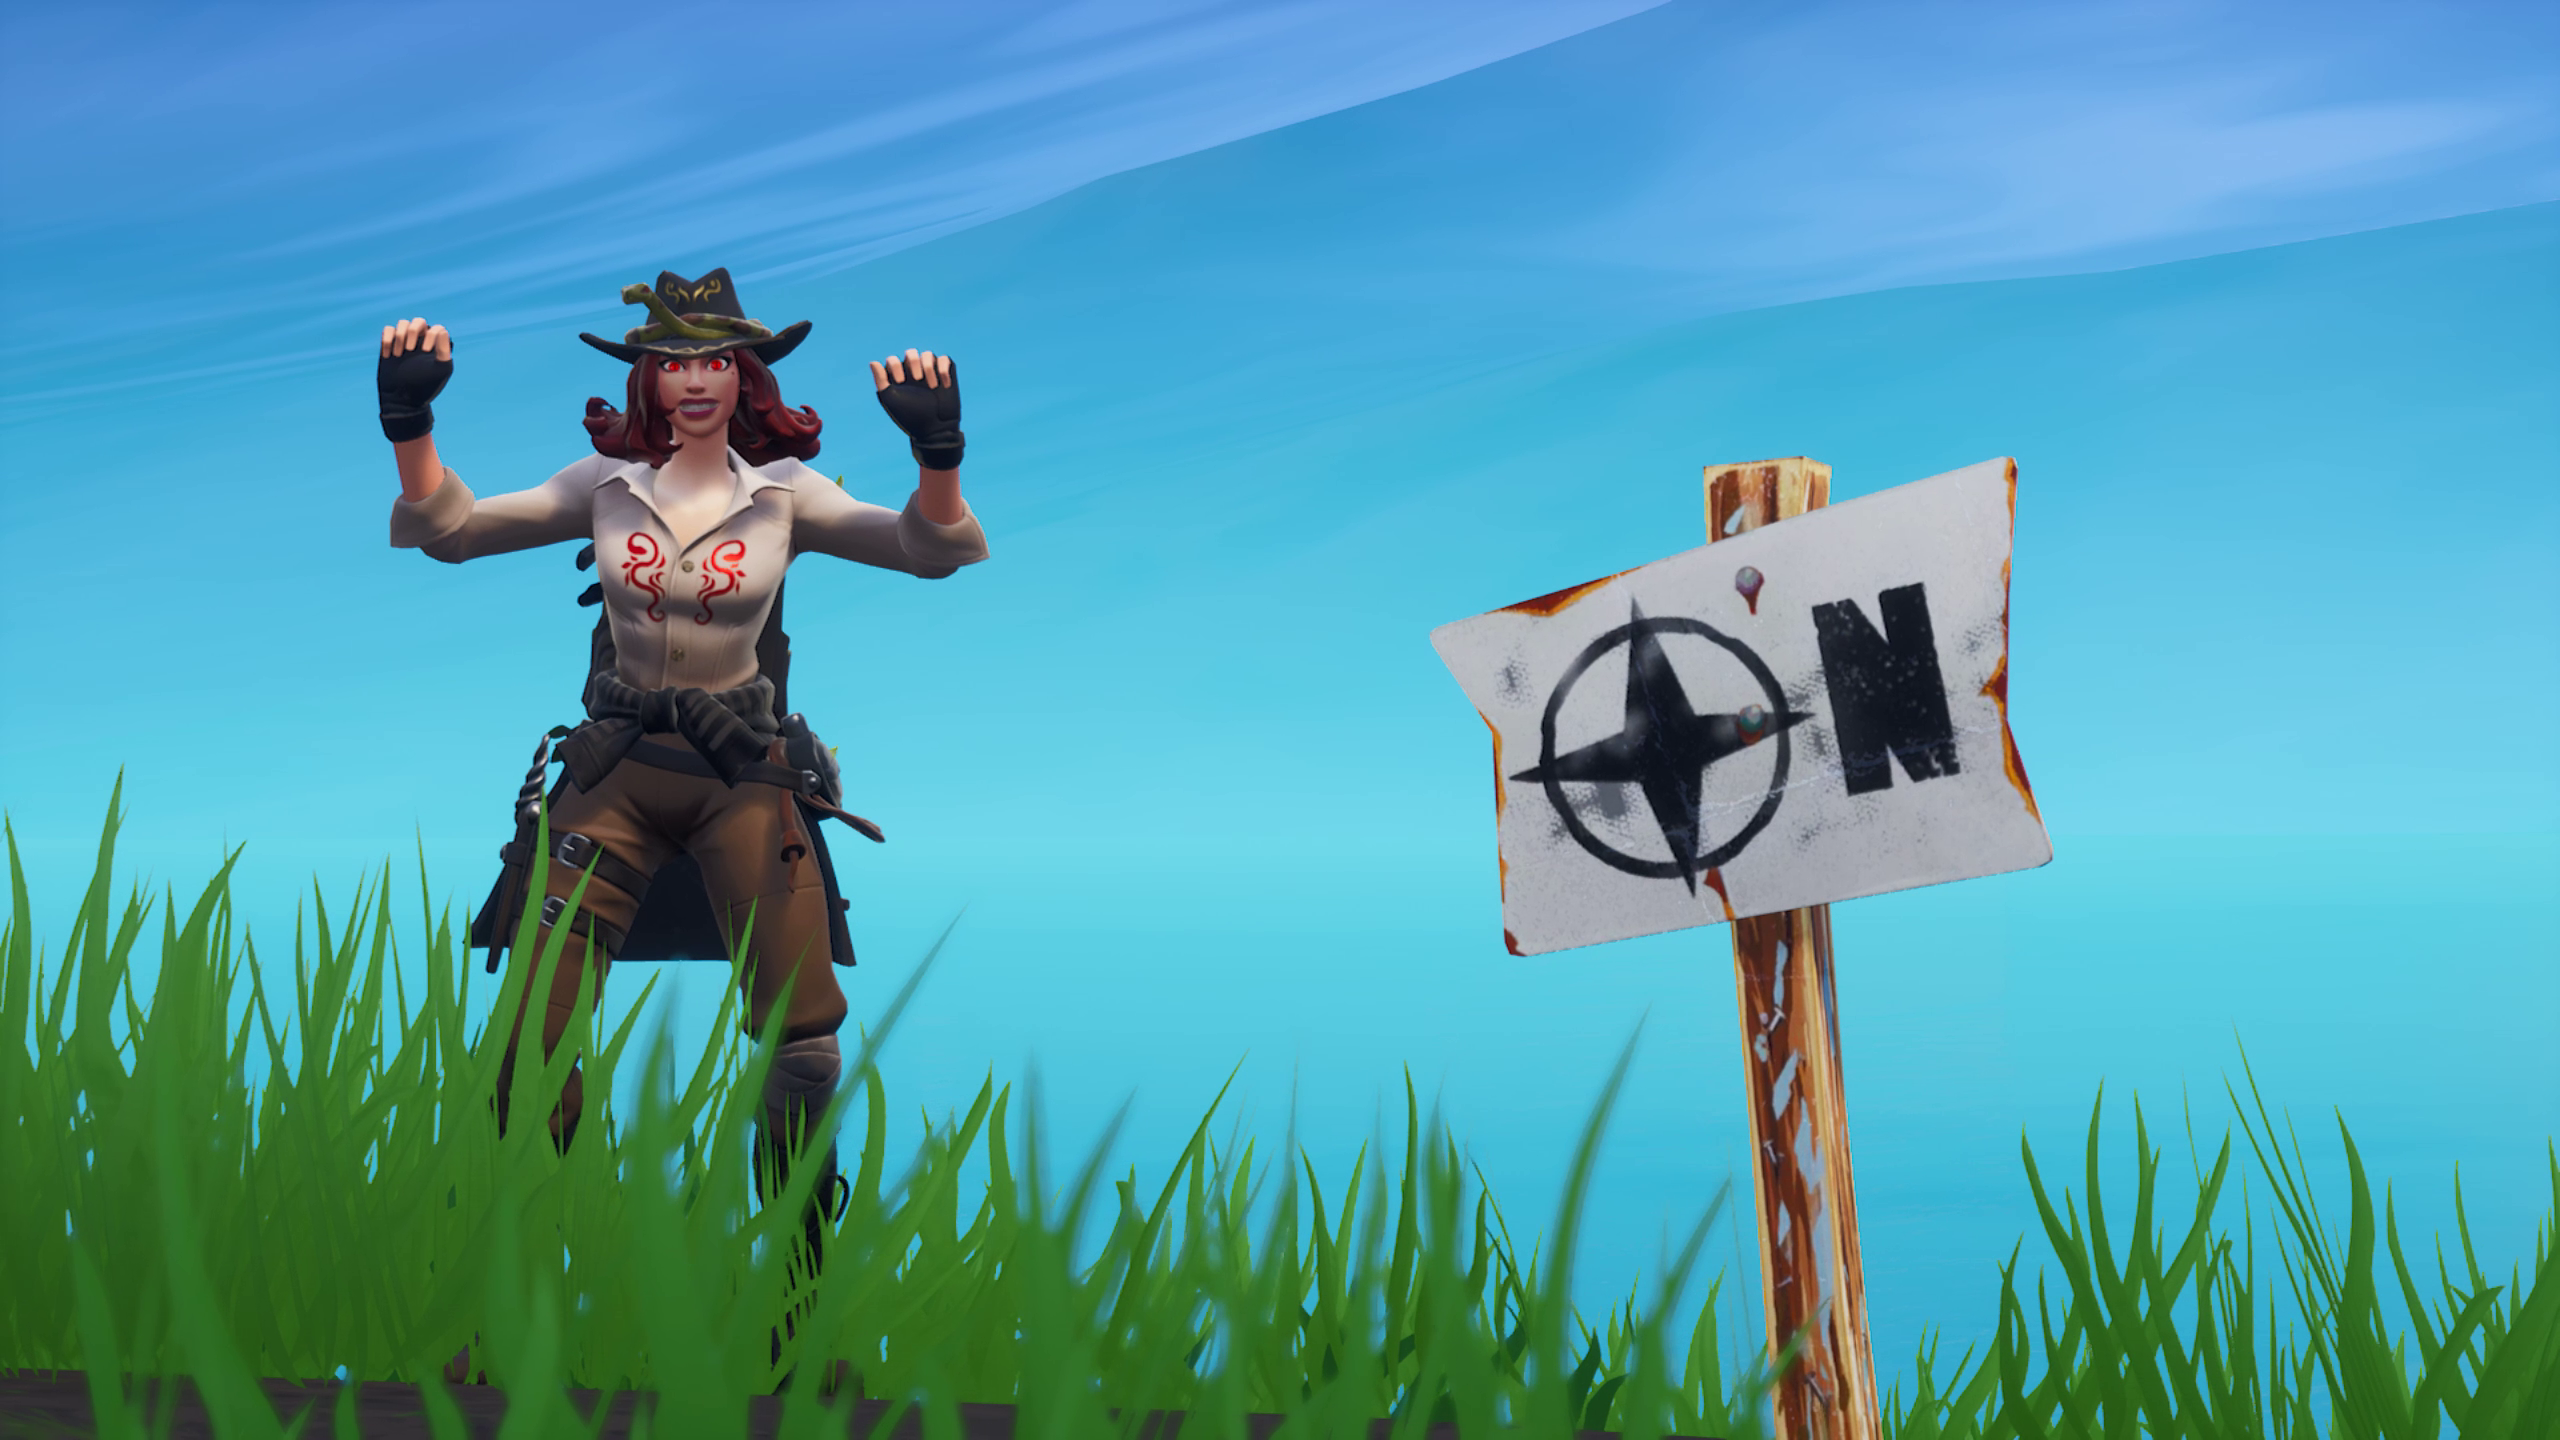  - fortnite visit north south east and west points of the island